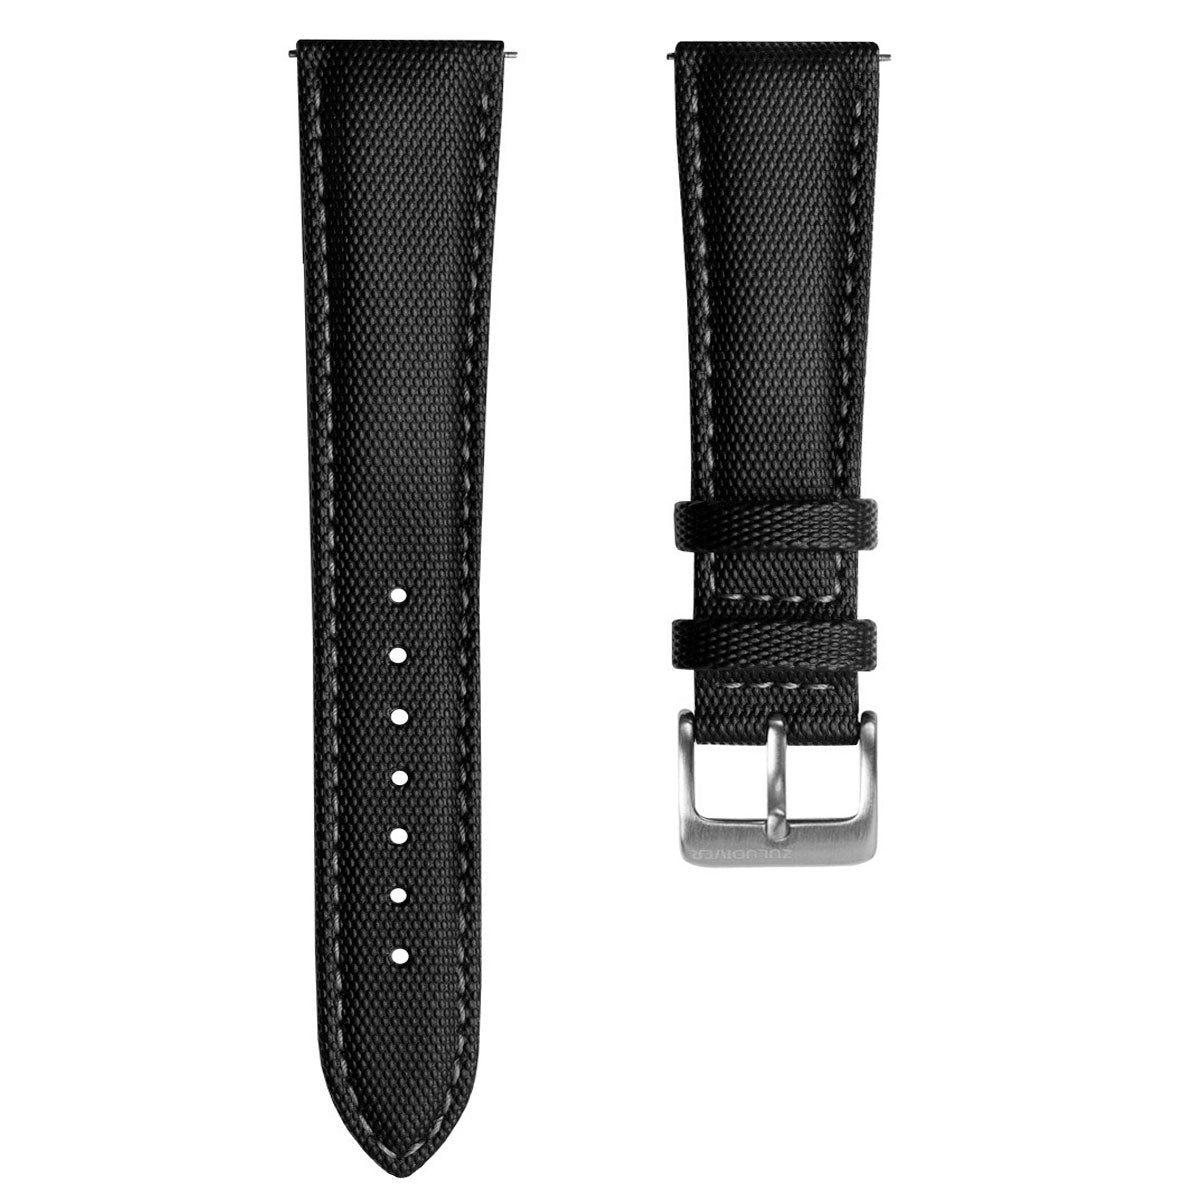 Stylish Silicone Watch Band Se - Narrow Replacement Strap For